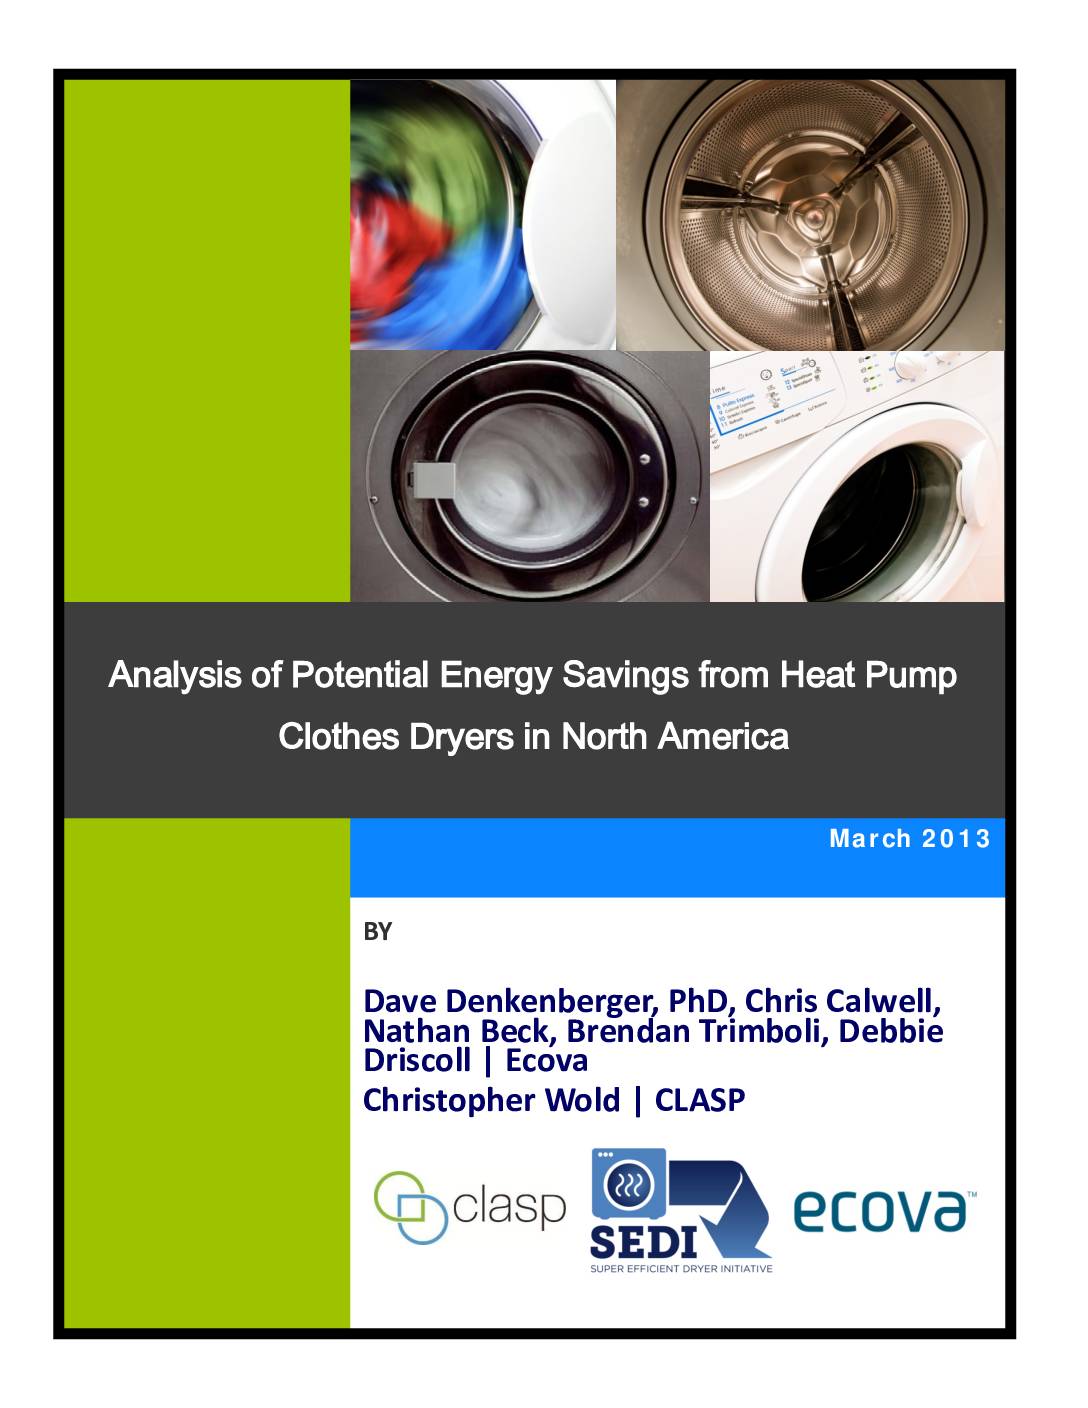 Analysis of Potential Energy Savings from Heat Pump Clothes Dryers in North America